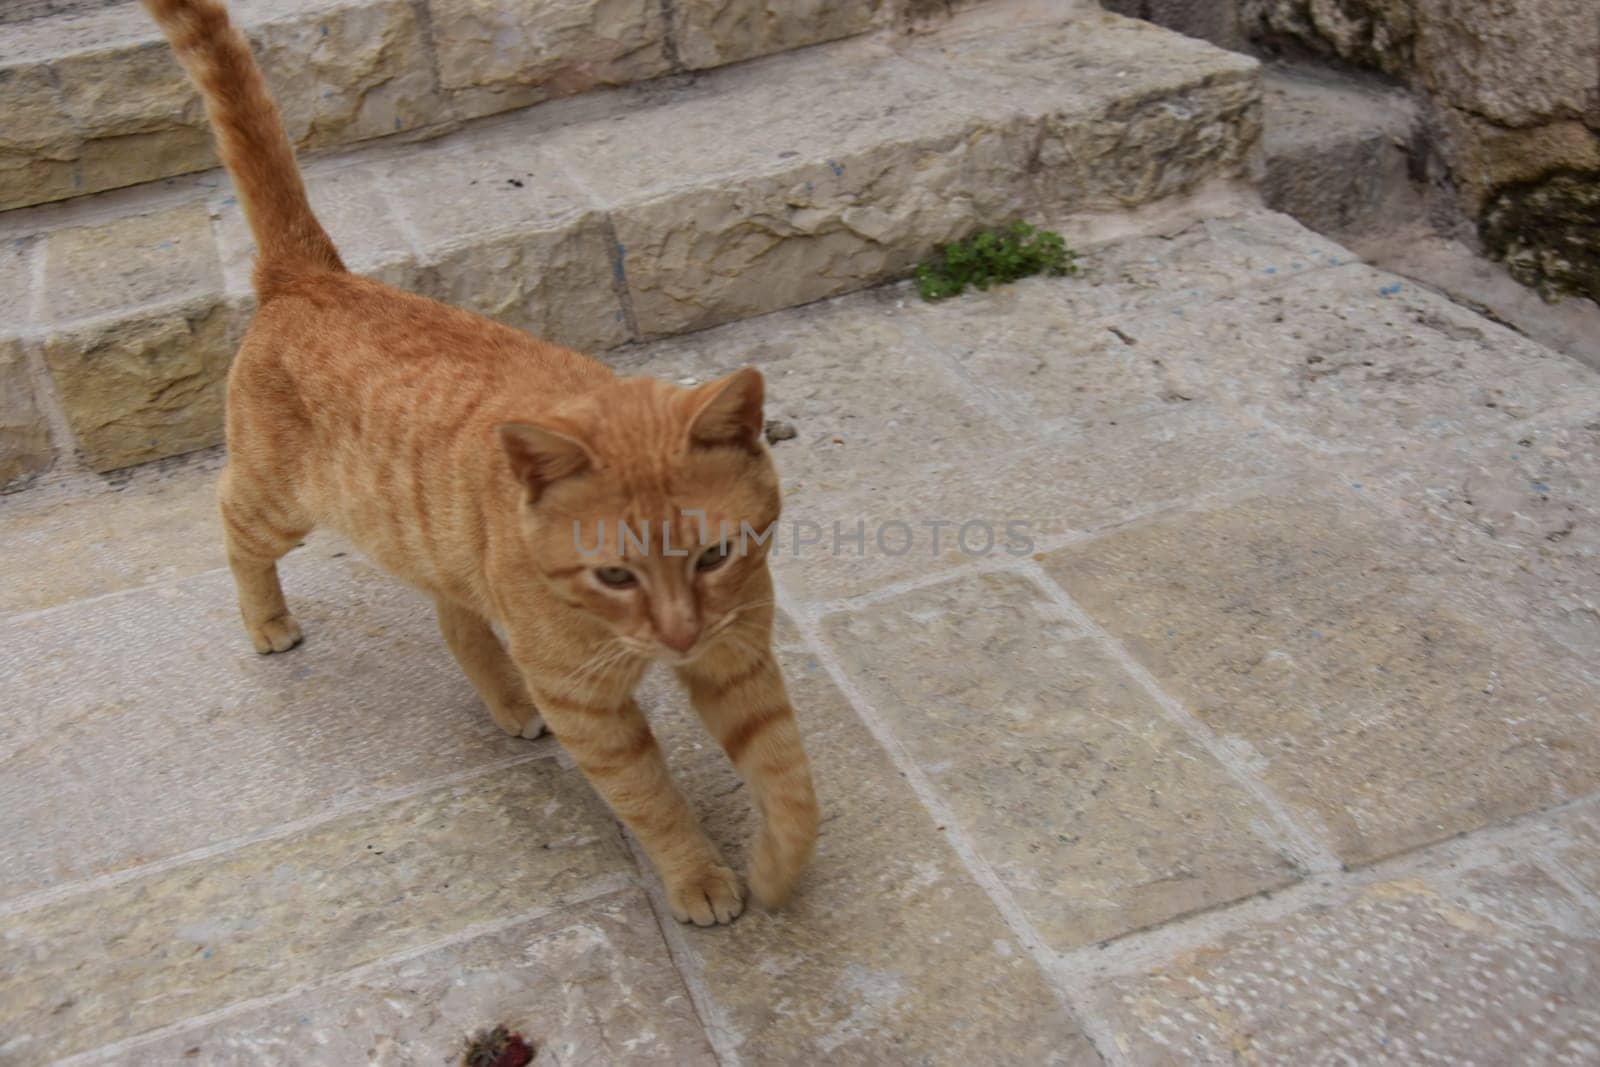 A ginger cat walks along the old white stone steps. Jerusalem, Israel 27 March 2021. High quality photo